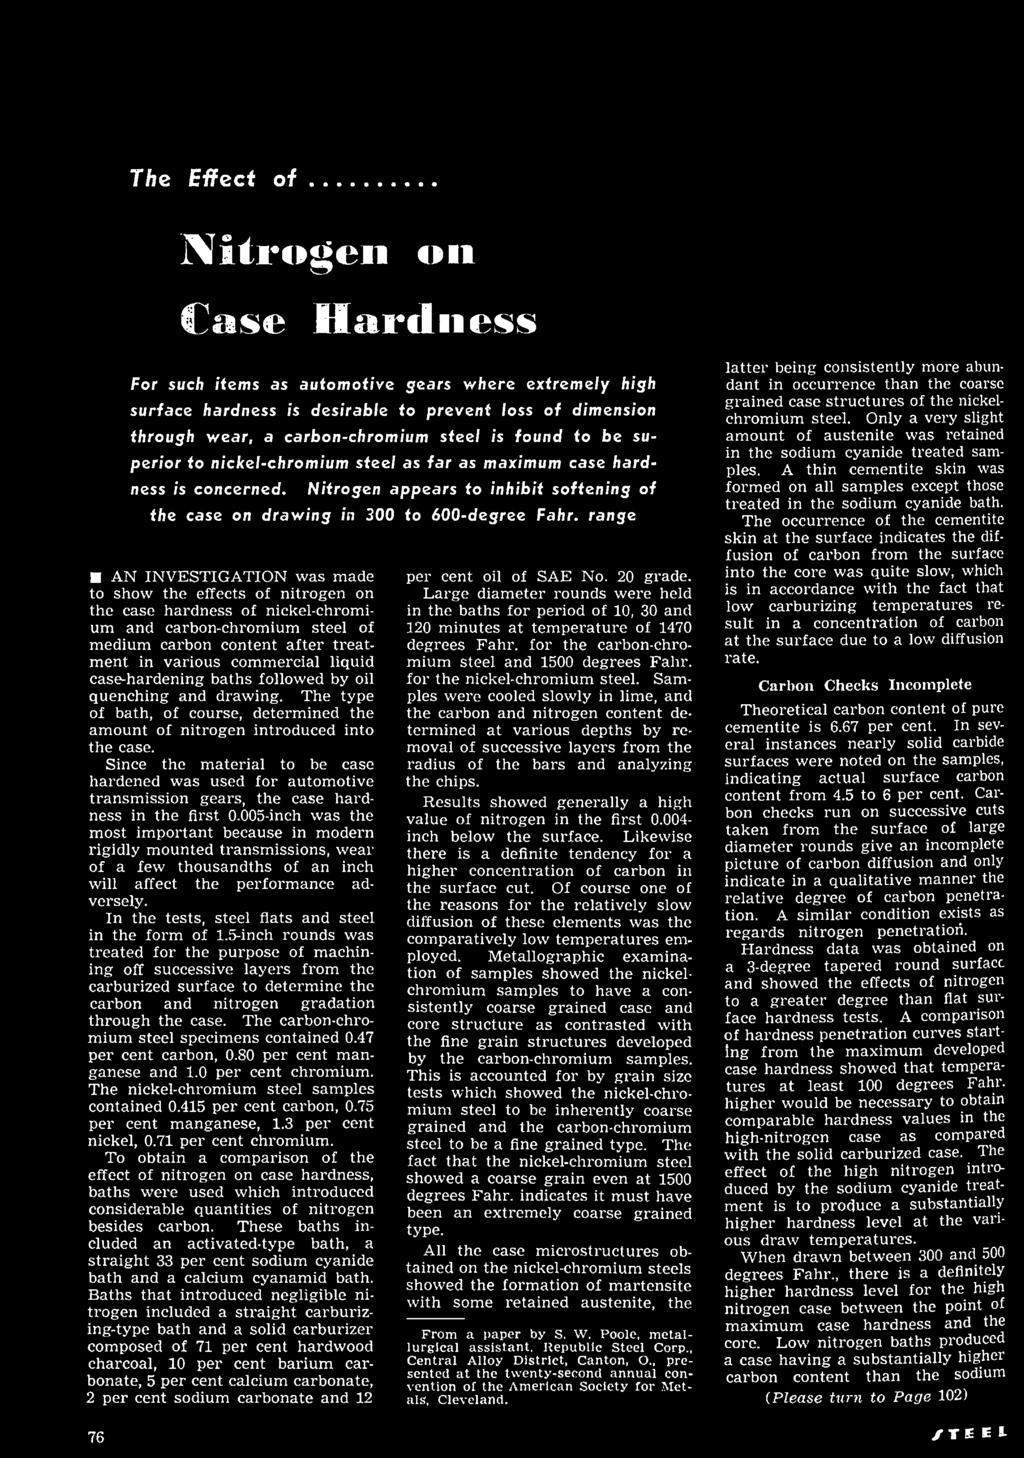 r a n g ę AN INVESTIGATION was made to show the effects of nitrogen on the case hardness of nickel-chromium and carbon-chromium steel of medium carbon content a fte r tre a t m ent in various